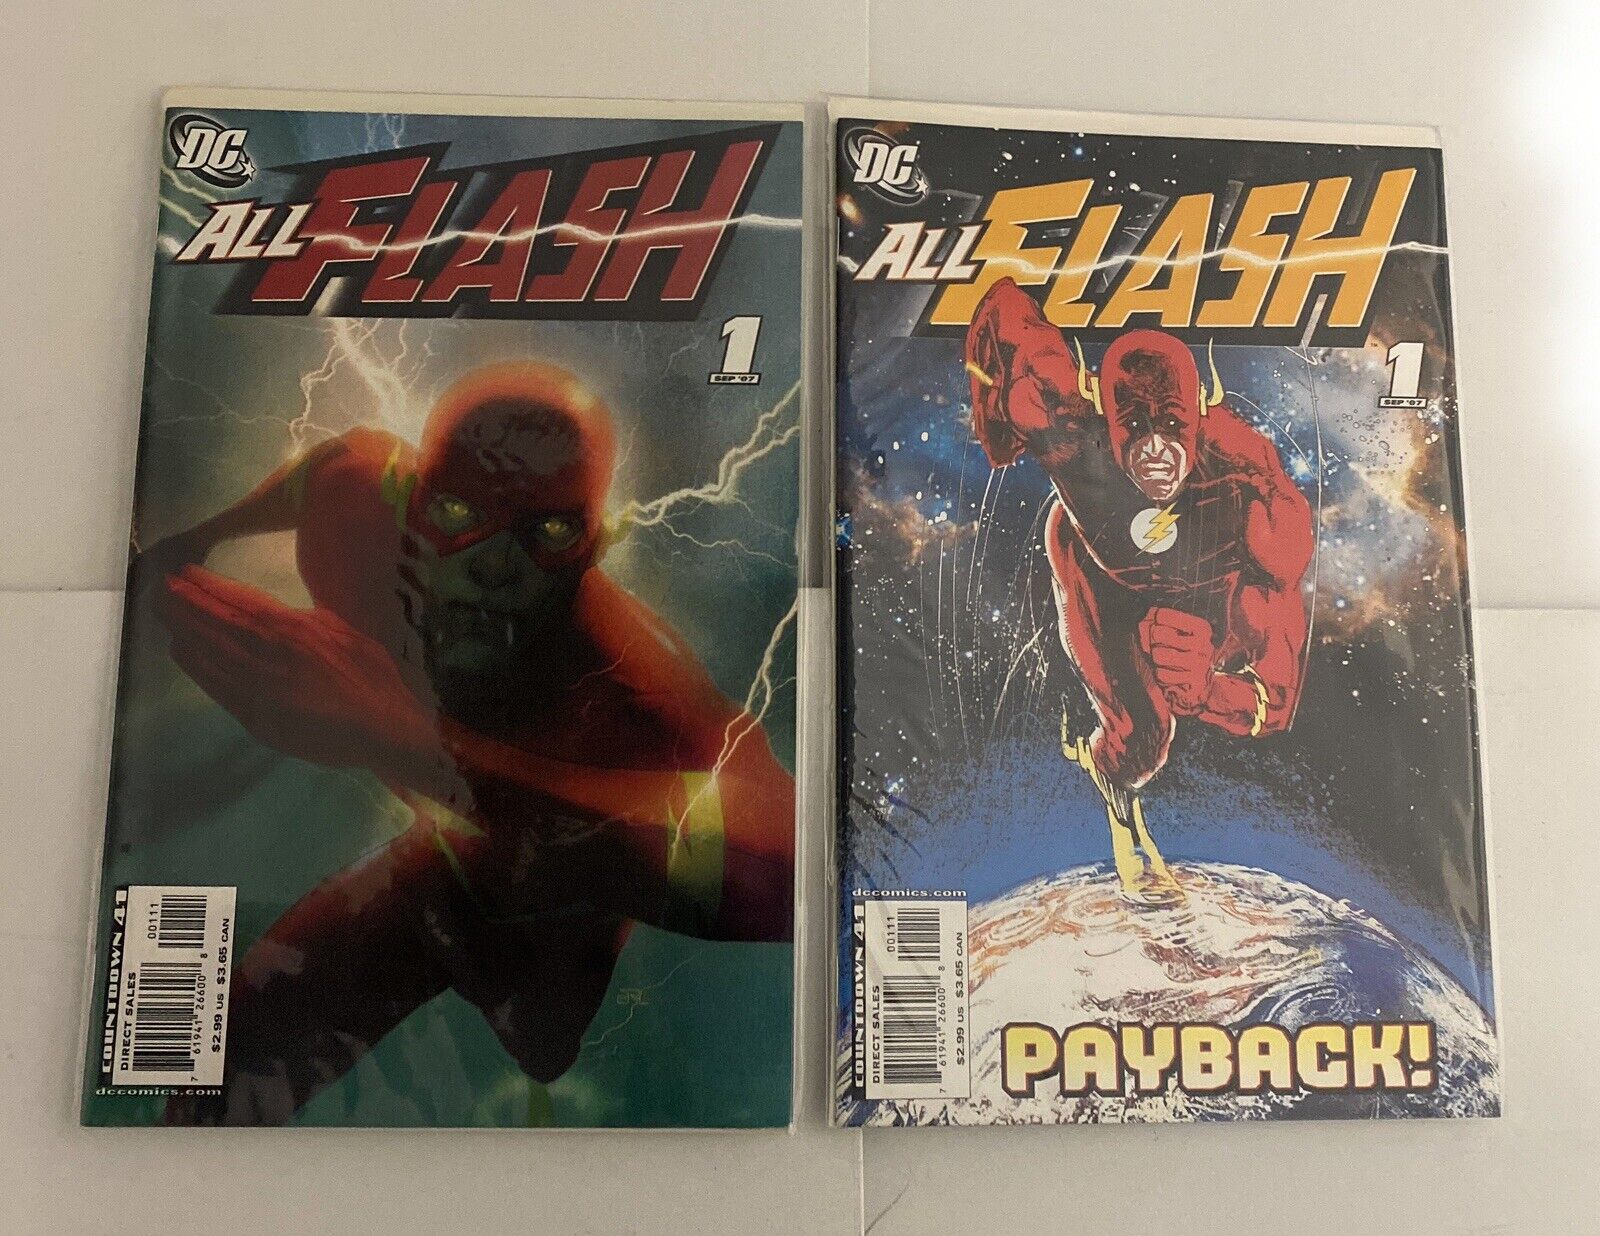 All Flash #1 DC Comics 2007 Payback by Mark Waid + Variant Cover. Lot Of 2 VG.